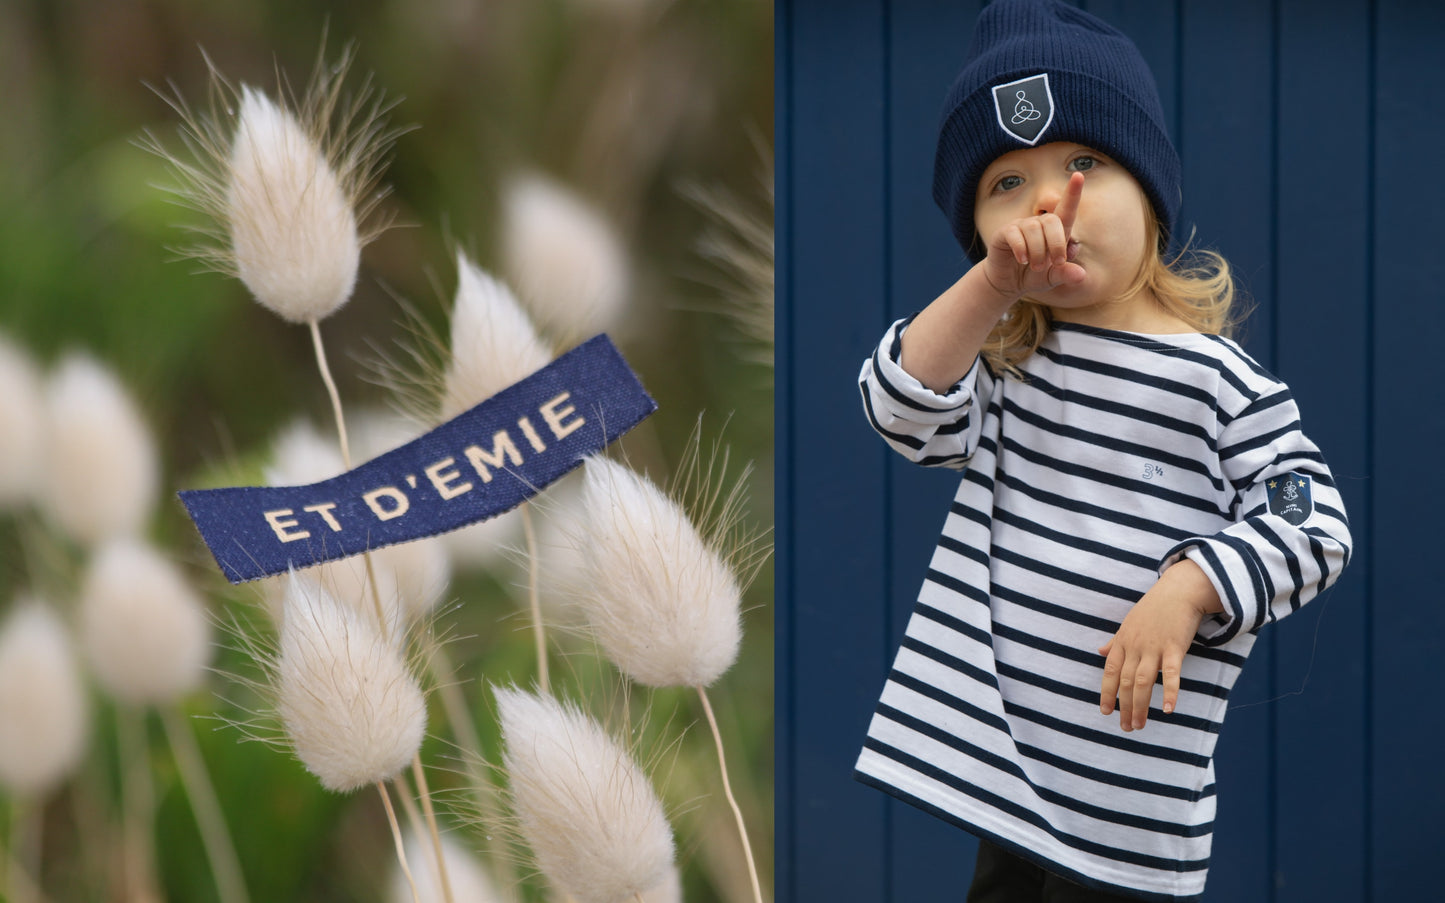 MINI CAPTAIN sailor shirt "I'm 2 and a half years old" embroidered in organic cotton 🇫🇷